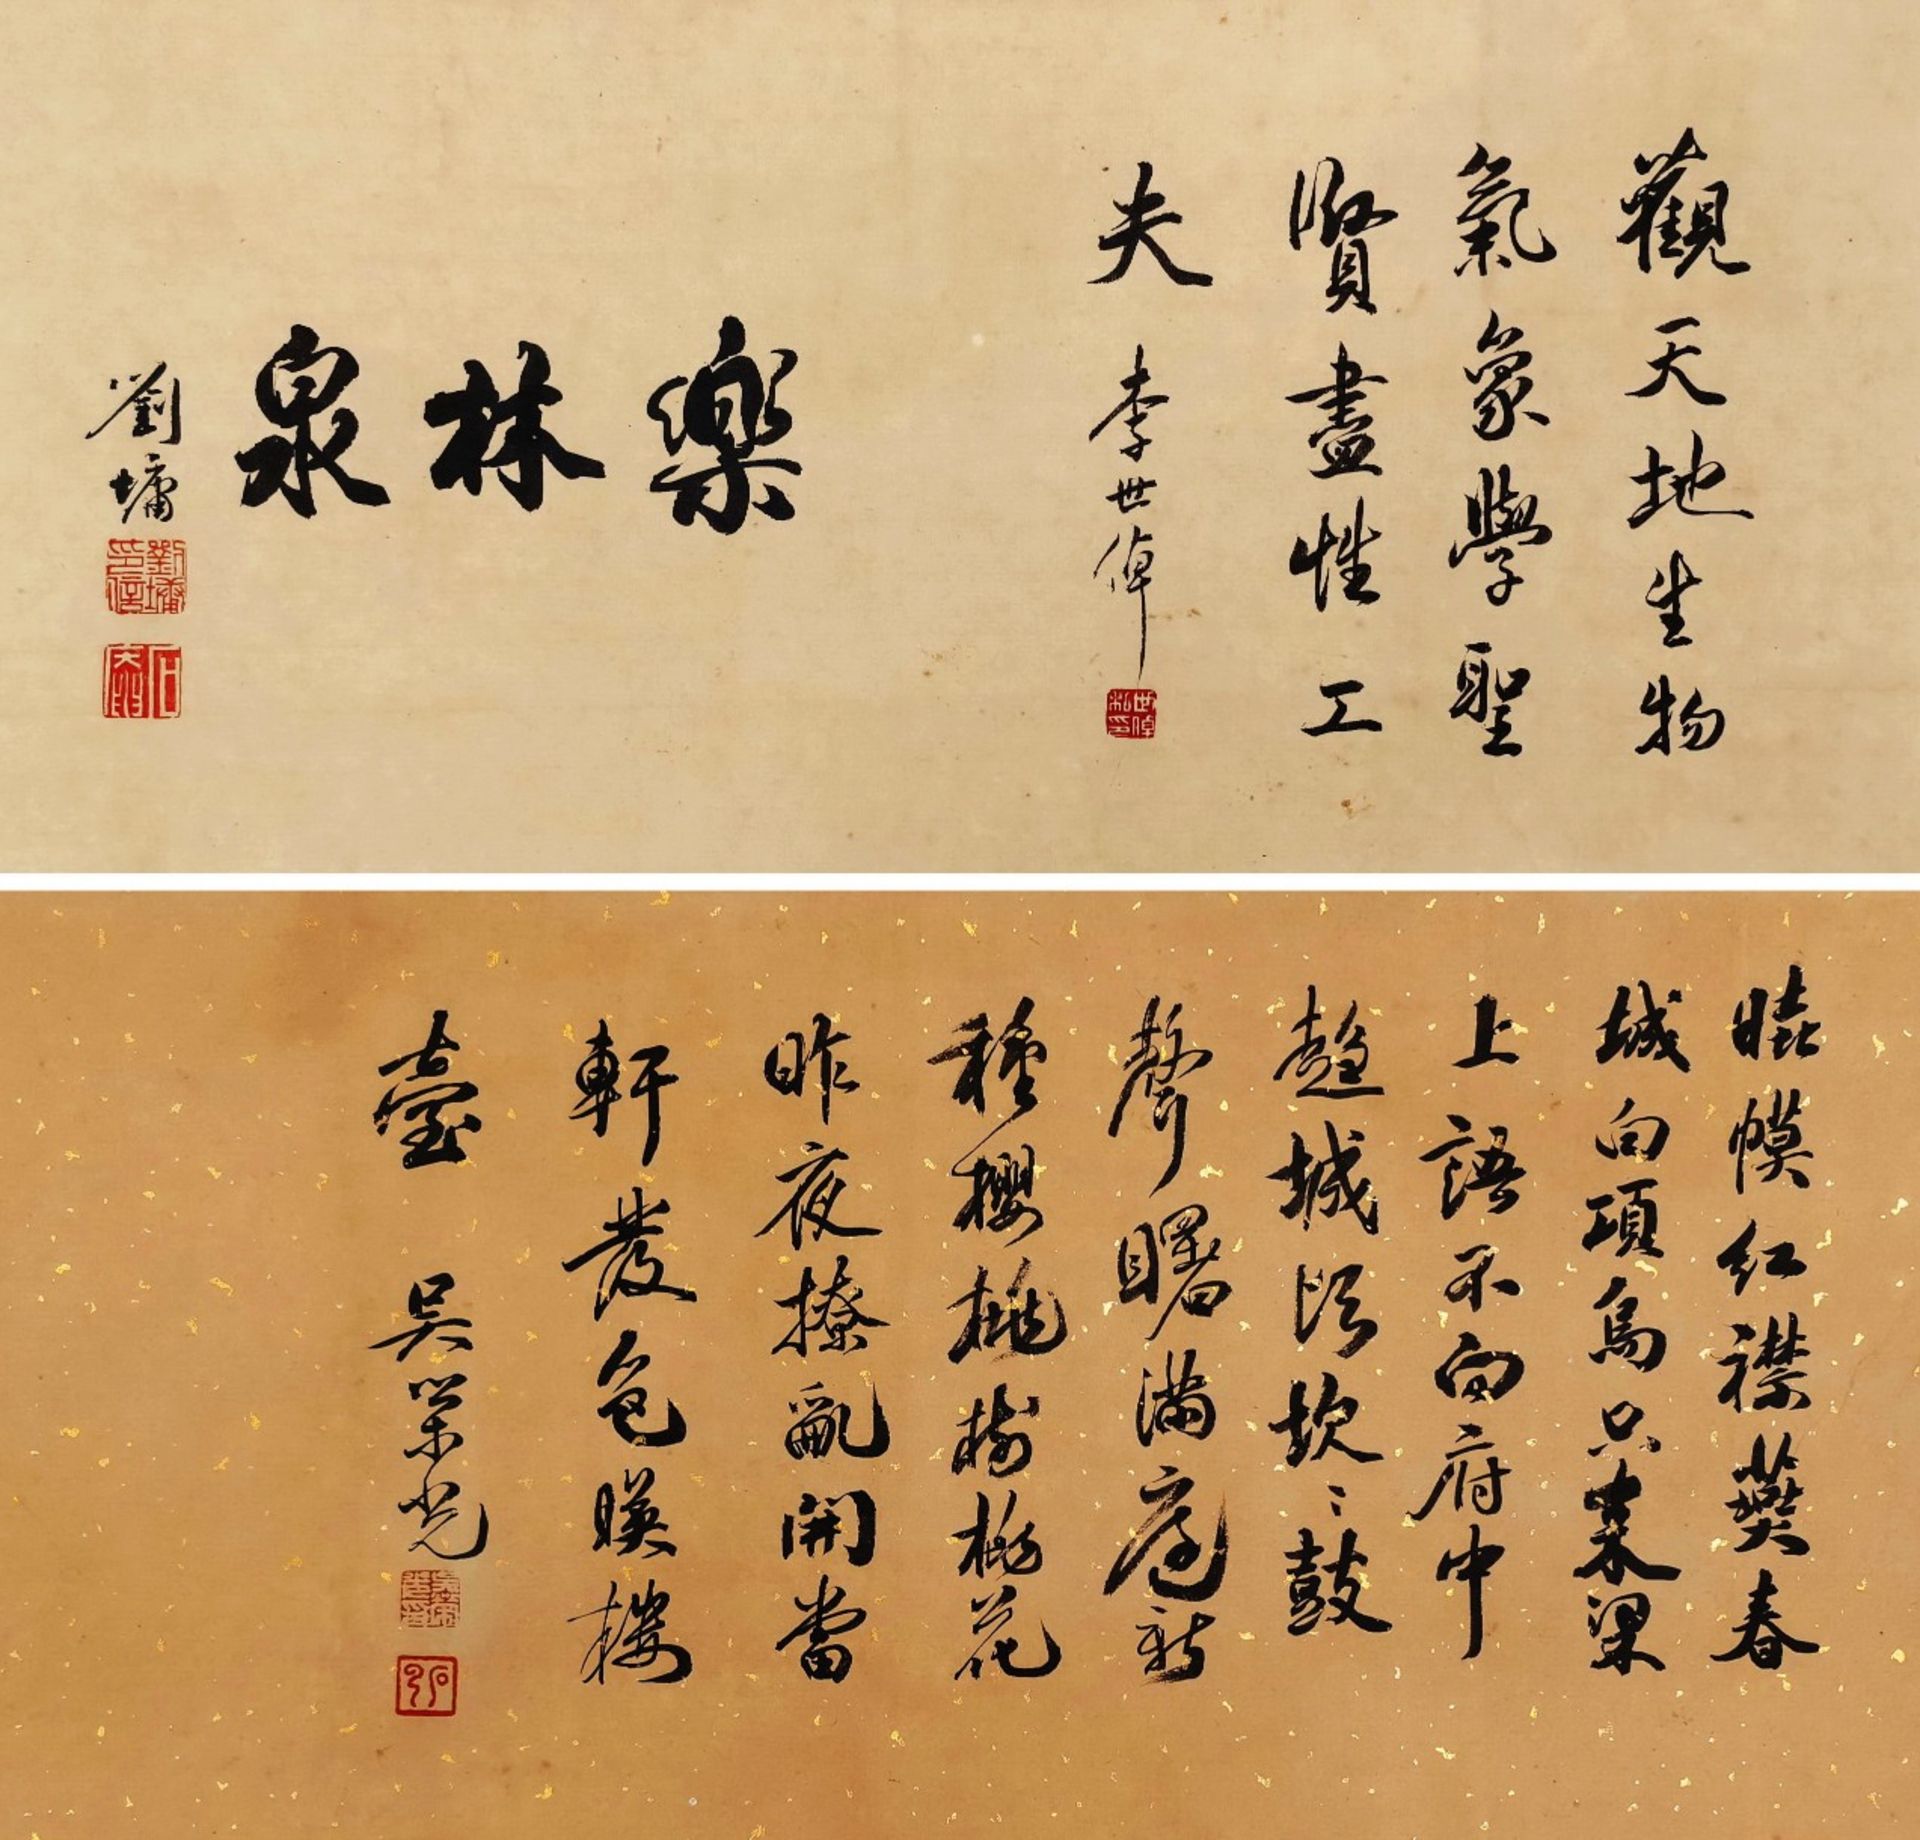 A Chinese Hand Scroll Painting By Jing Hao - Image 7 of 9